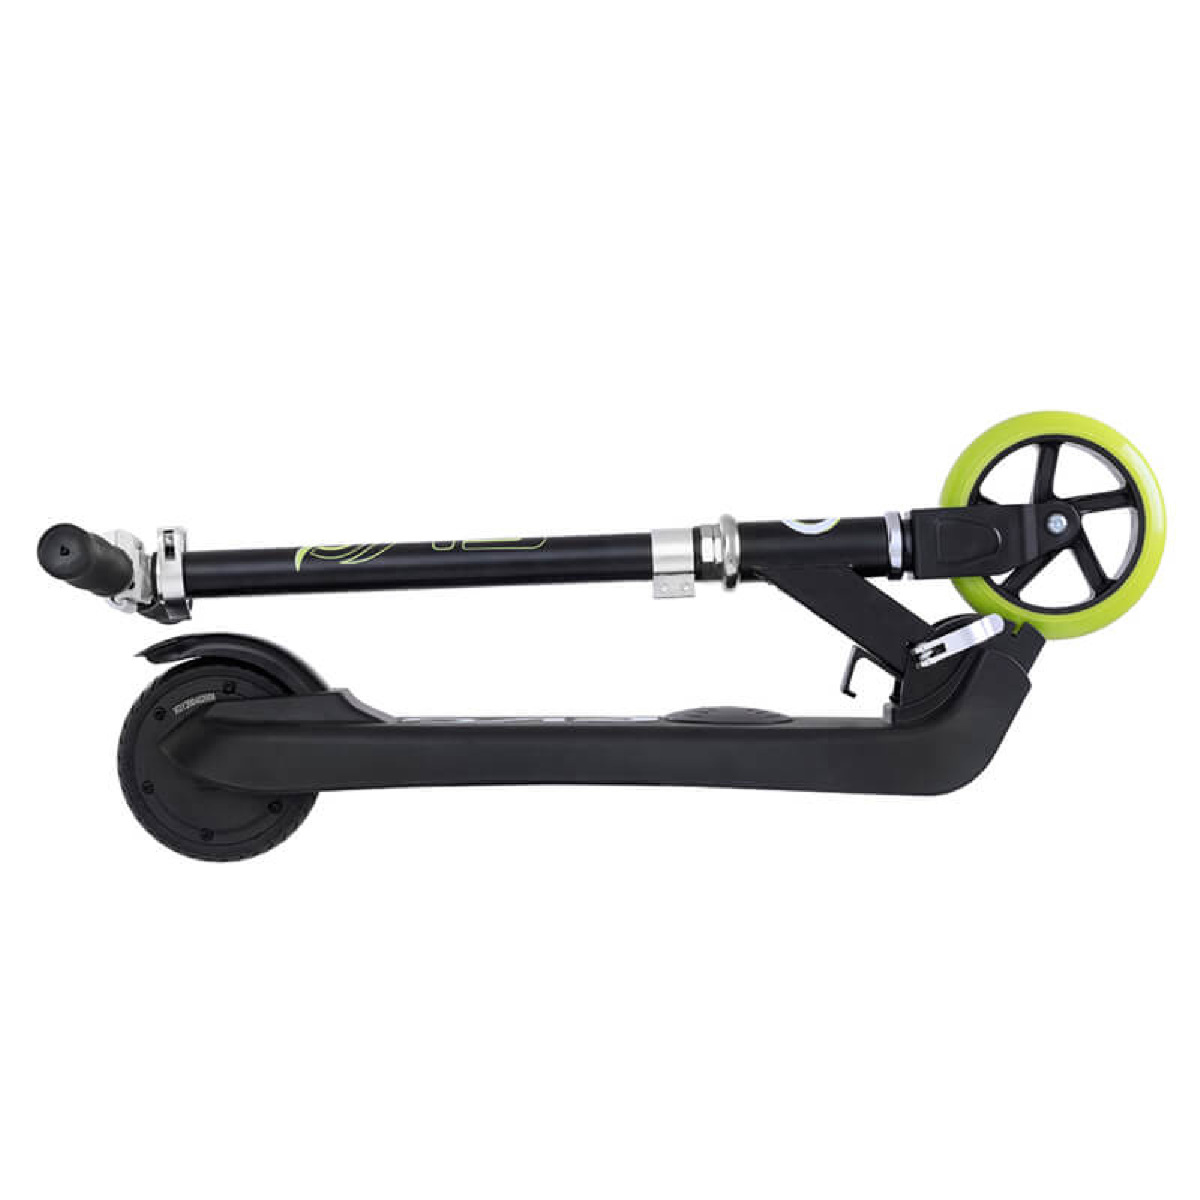 Evo VT1 Lithium Electric Scooter, 21.6V, Lime, 1437703